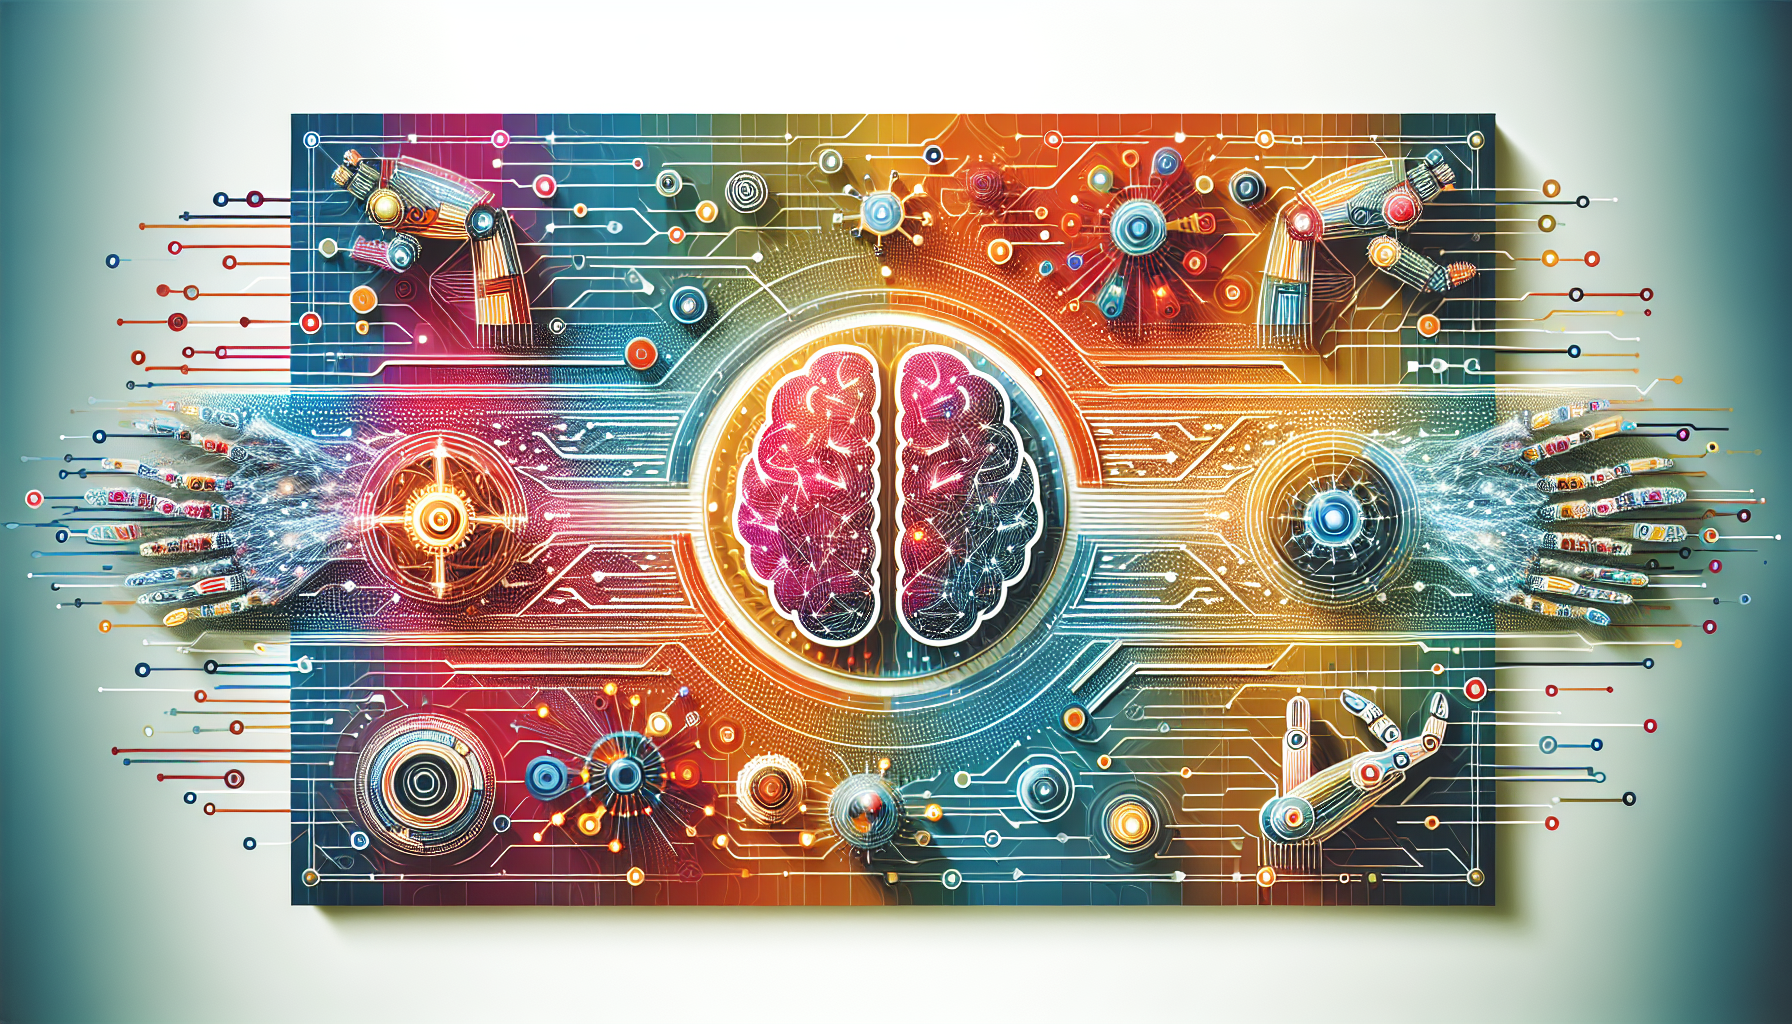 Design a cover image featuring futuristic elements such as an AI brain, robotic arms, and digital ne